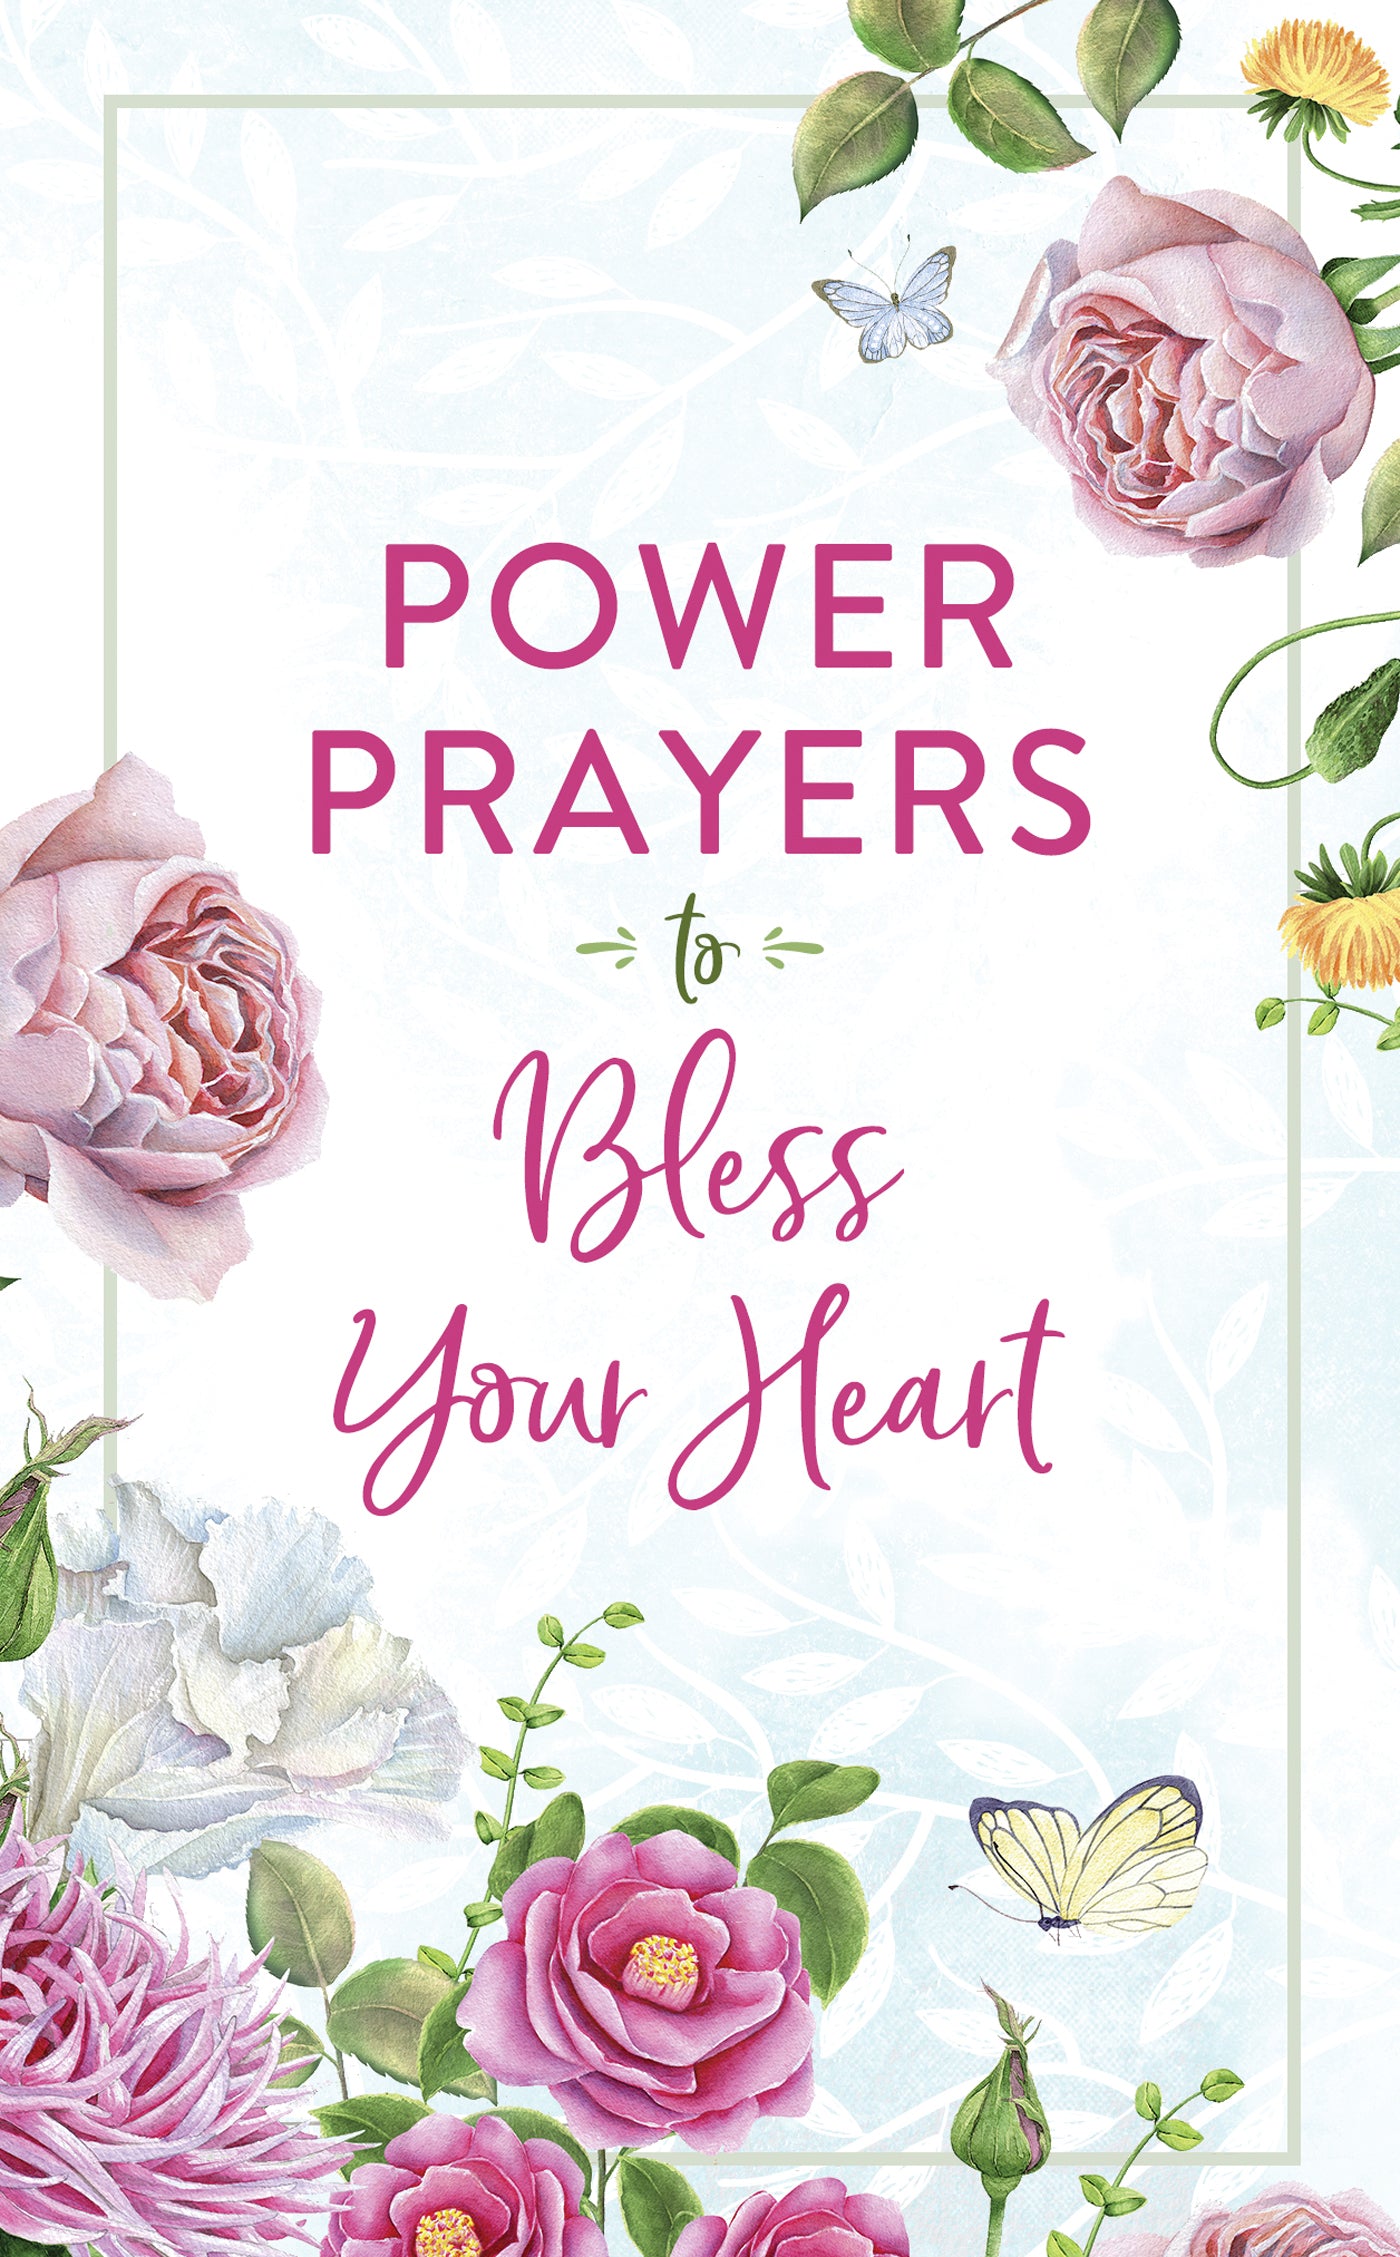 Power Prayers to Bless Your Heart - The Christian Gift Company